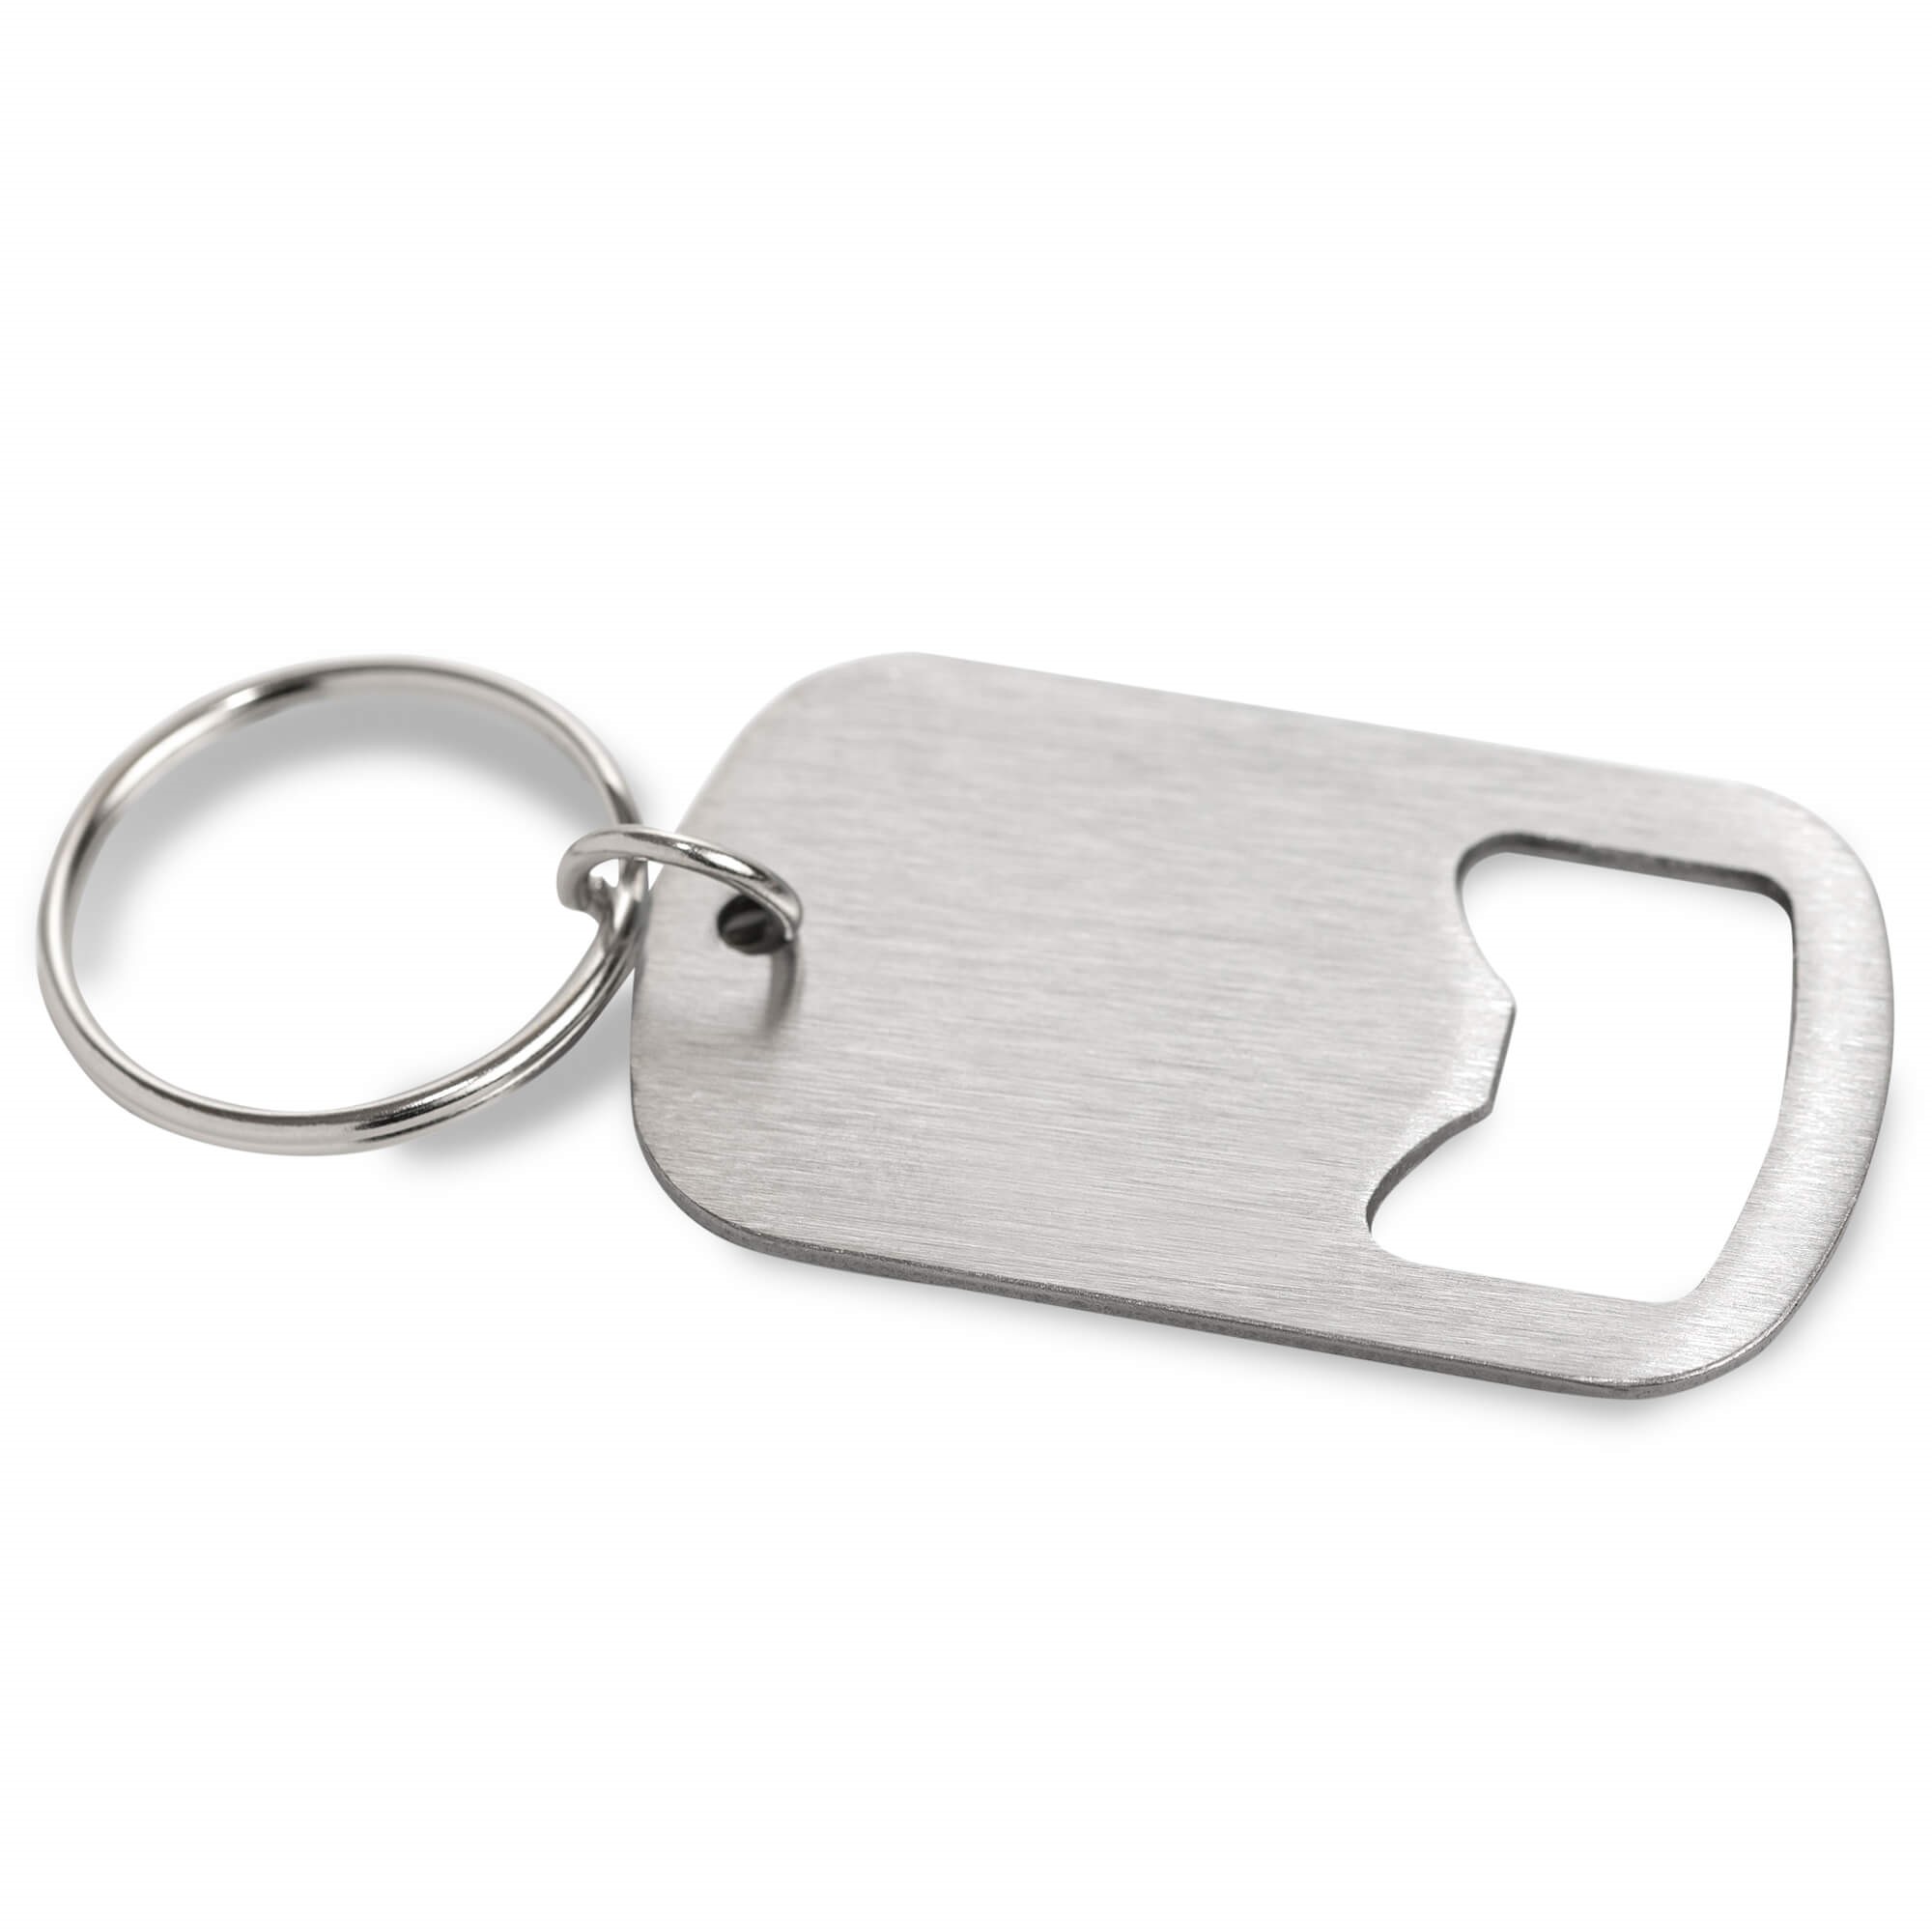 Key ring bottle opener stainless steel 50mm x 31mm with key ring ø25mm